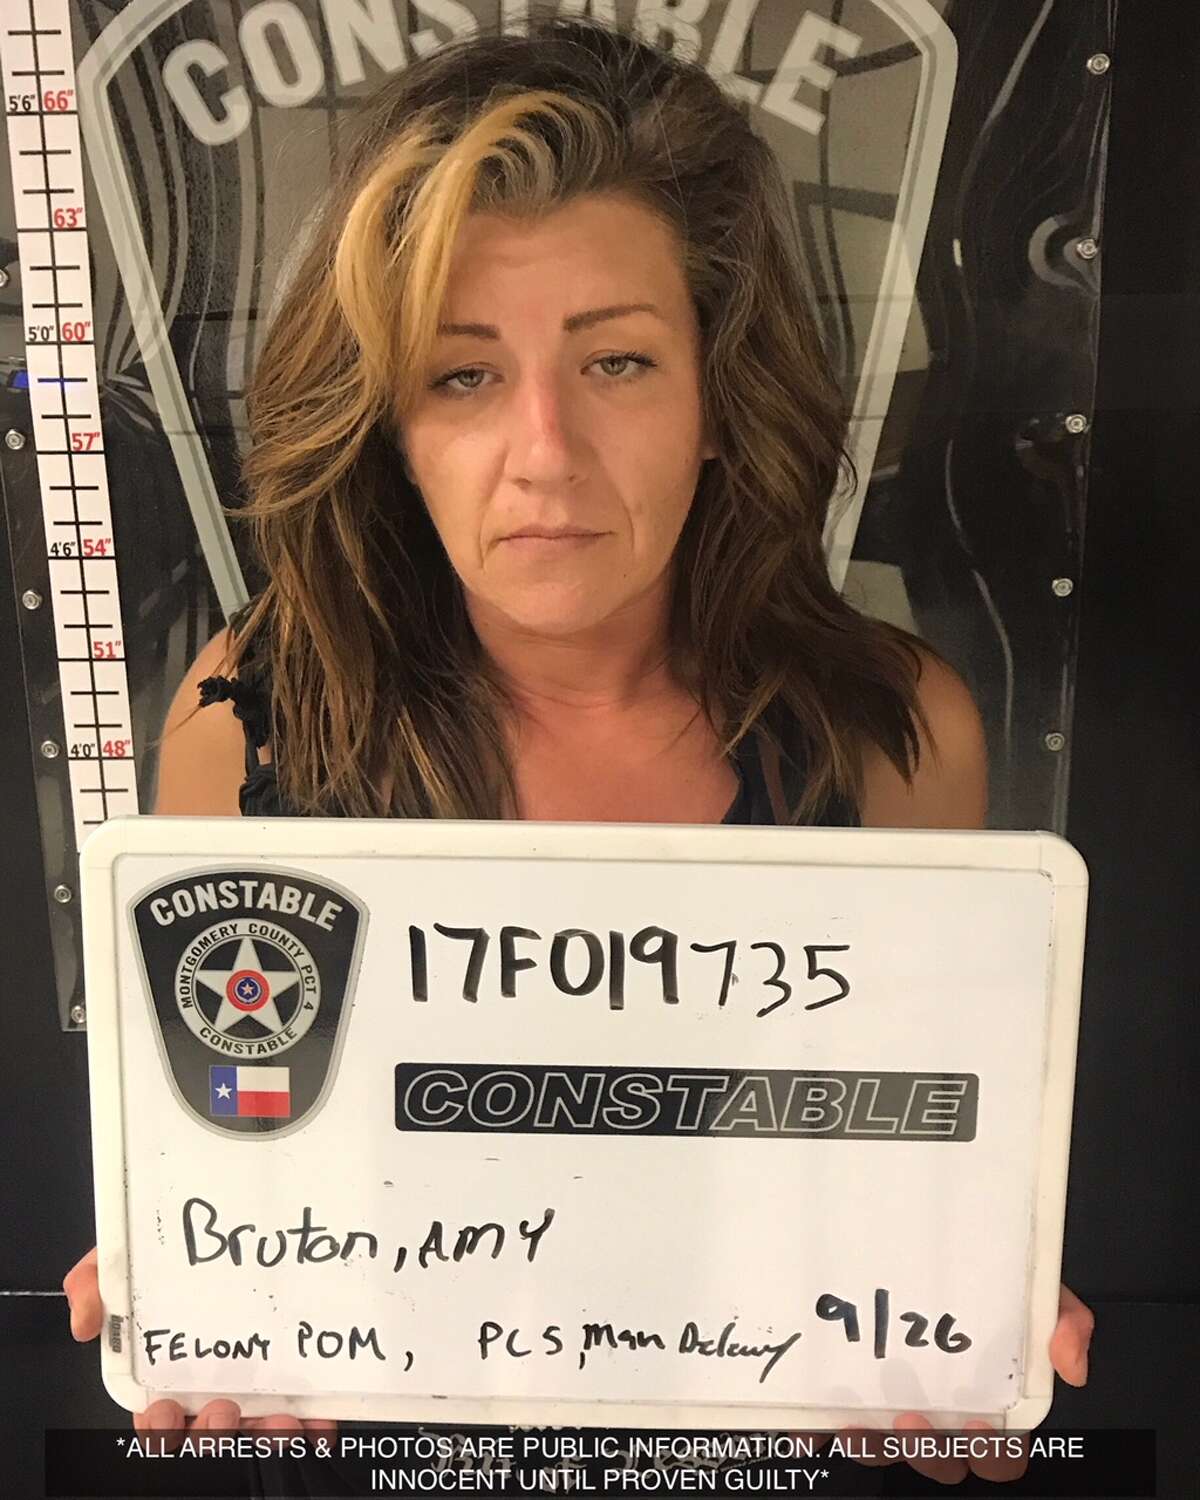 Amy Bruton, 36, is charged with charged with manufacture/delivery of a controlled substance and possession of marijuana in Montgomery County after she was arrested on Sept. 26, 2017. 